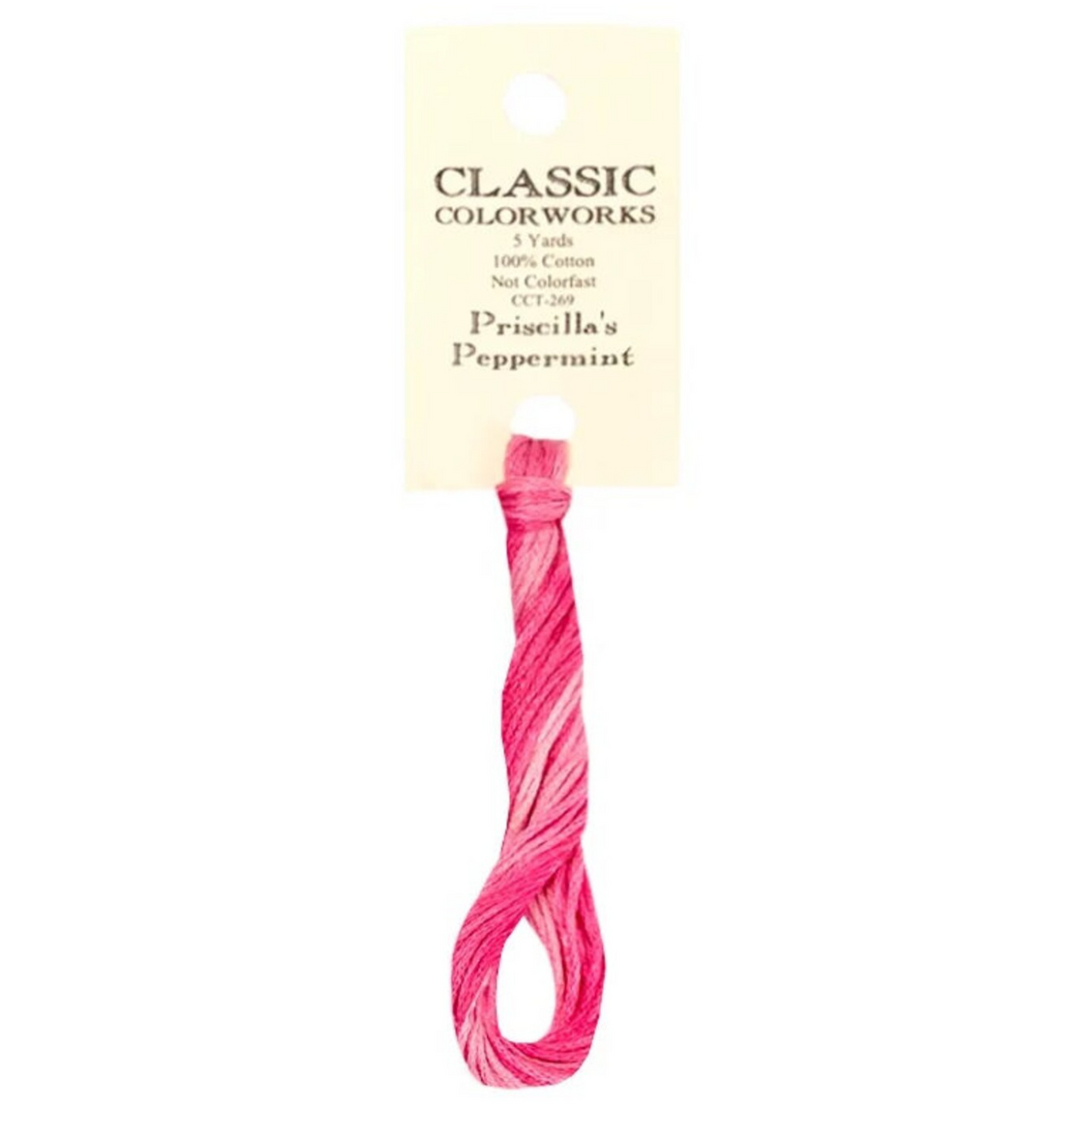 Priscilla's Peppermint | Classic Colorworks - Hand-Dyed Embroidery Floss